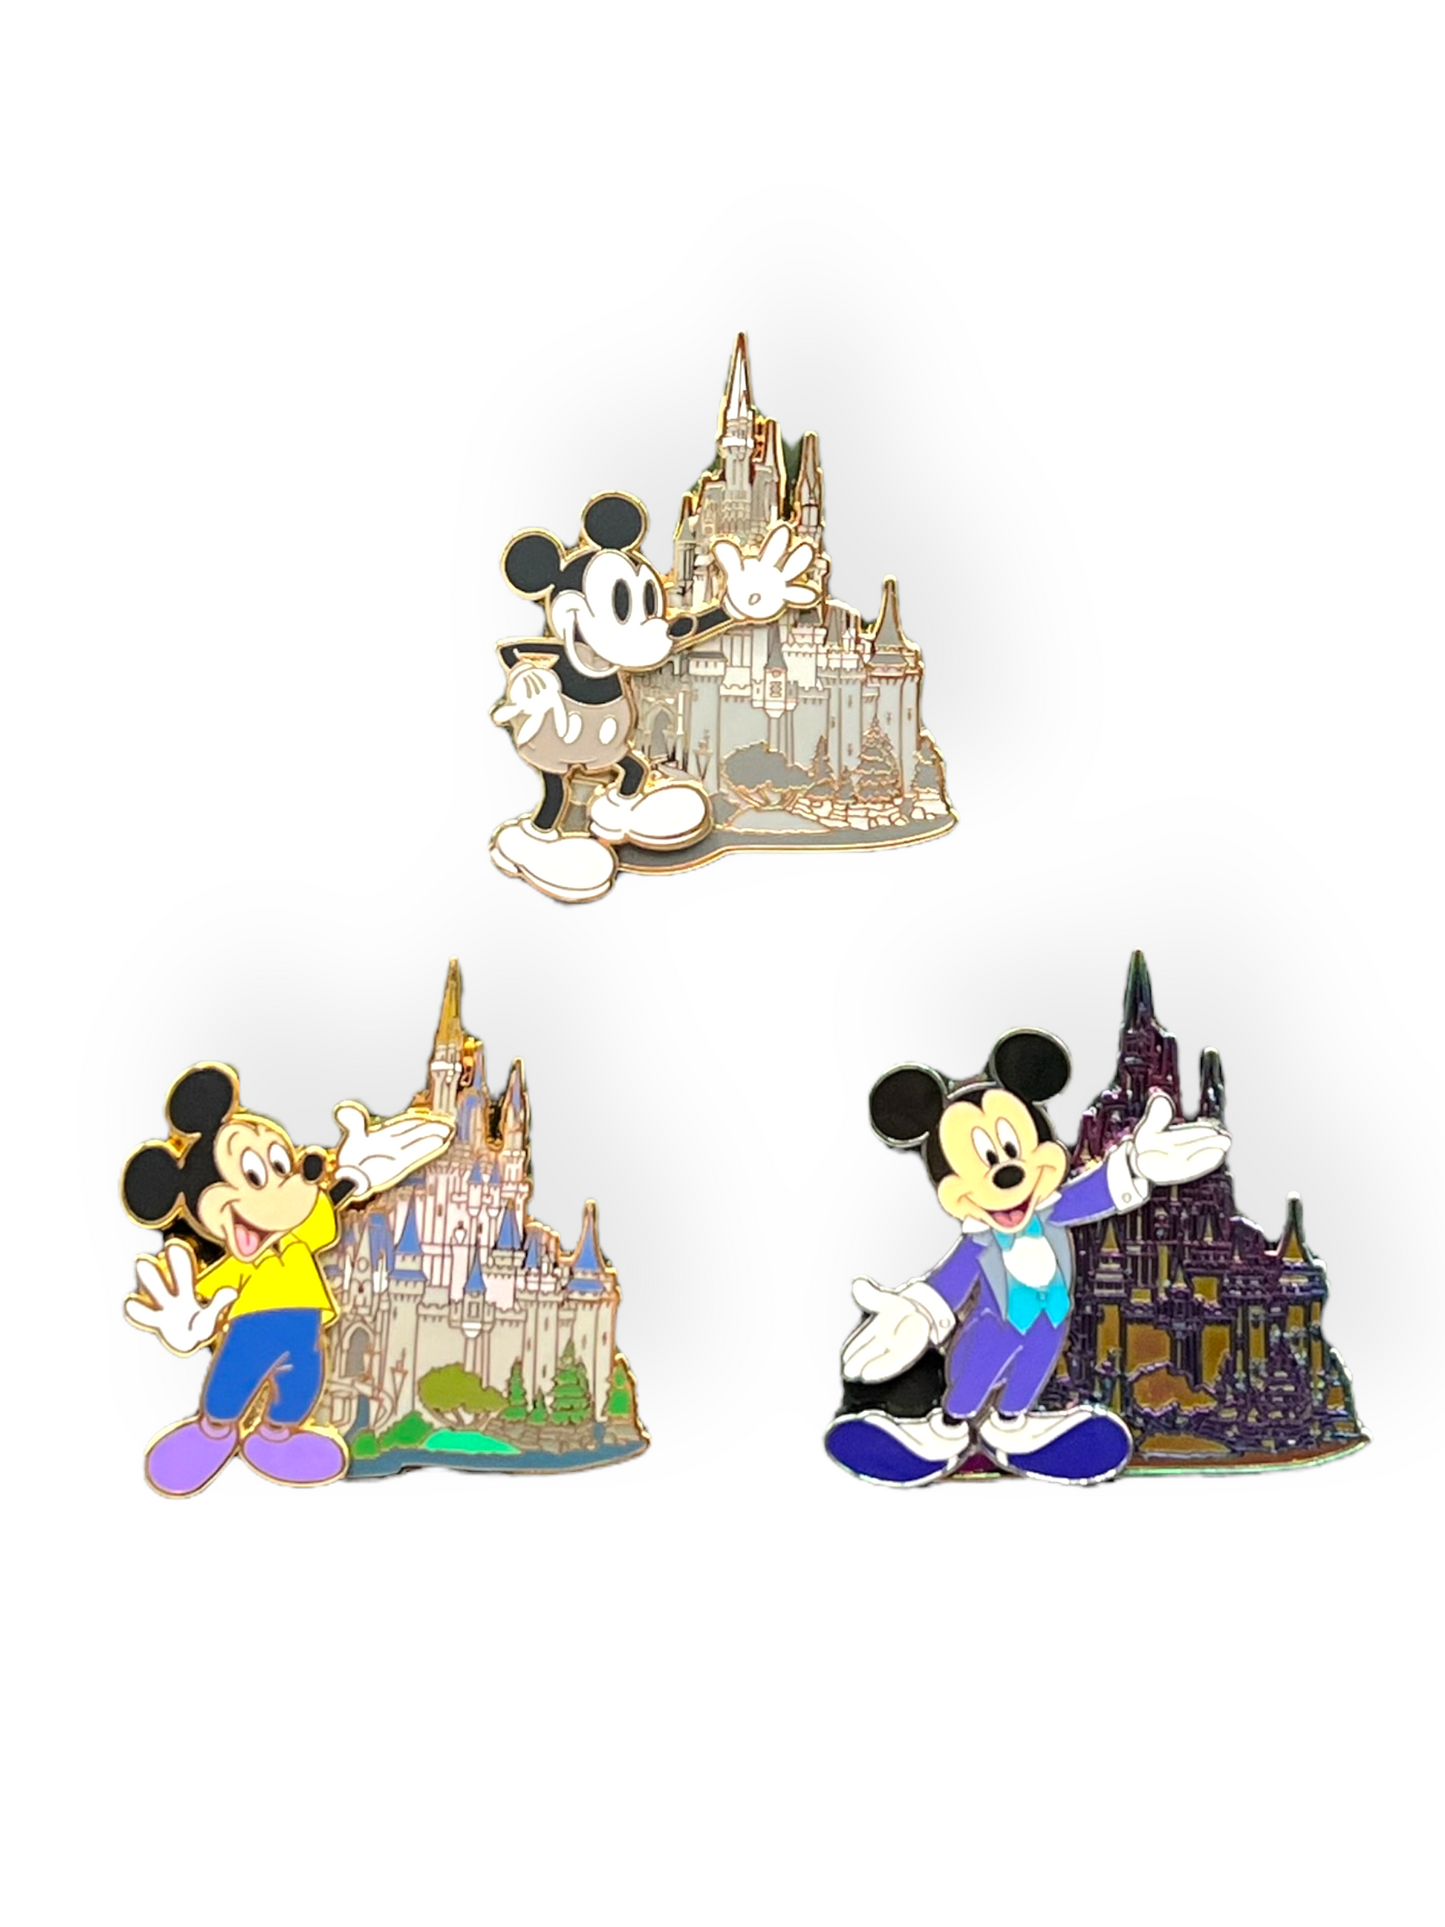 20 Years of Pin Trading WDW Castle Collection Pin Set